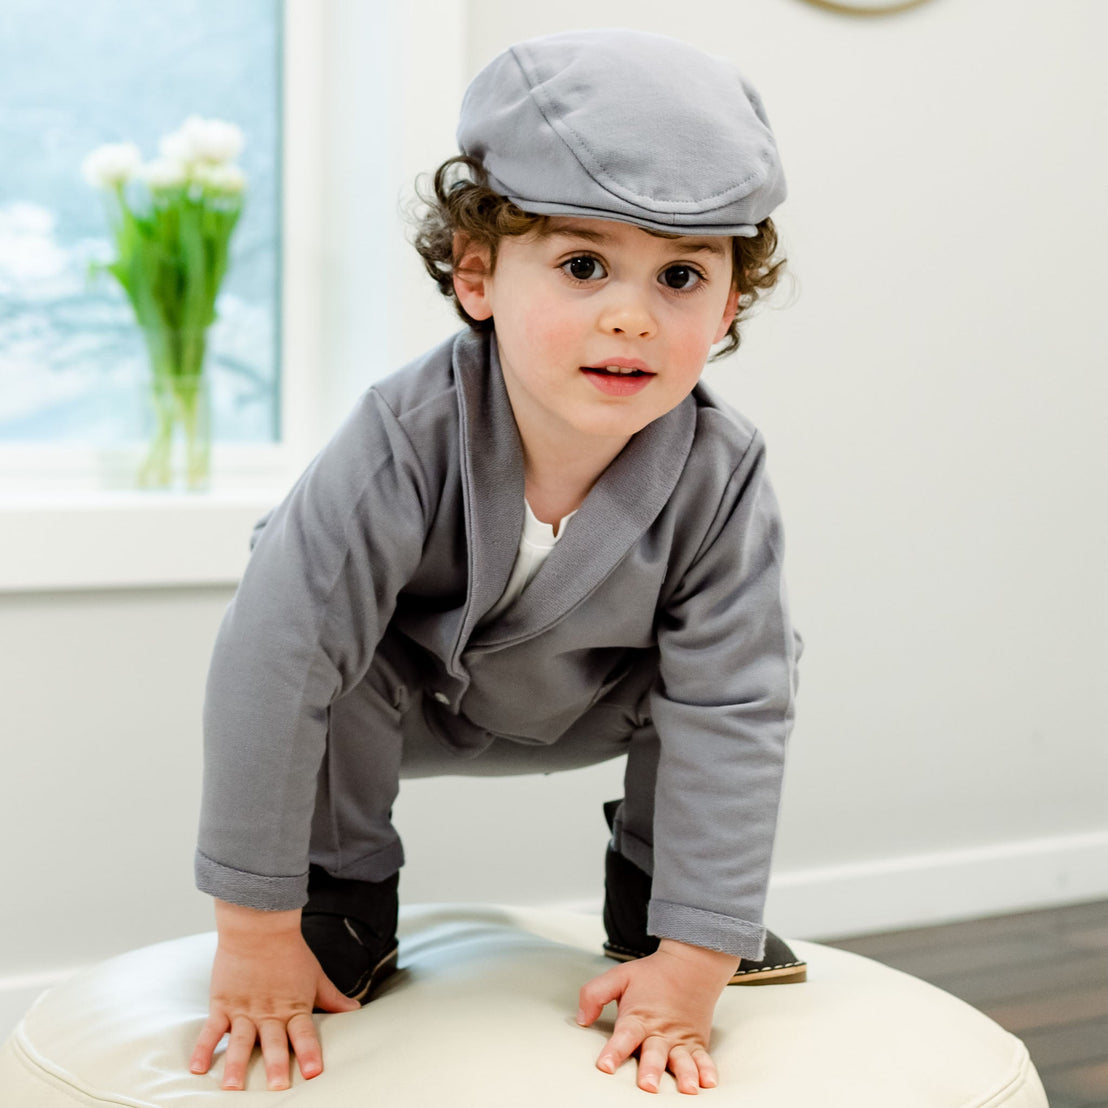 Toddler boy in grey cotton hat and suit